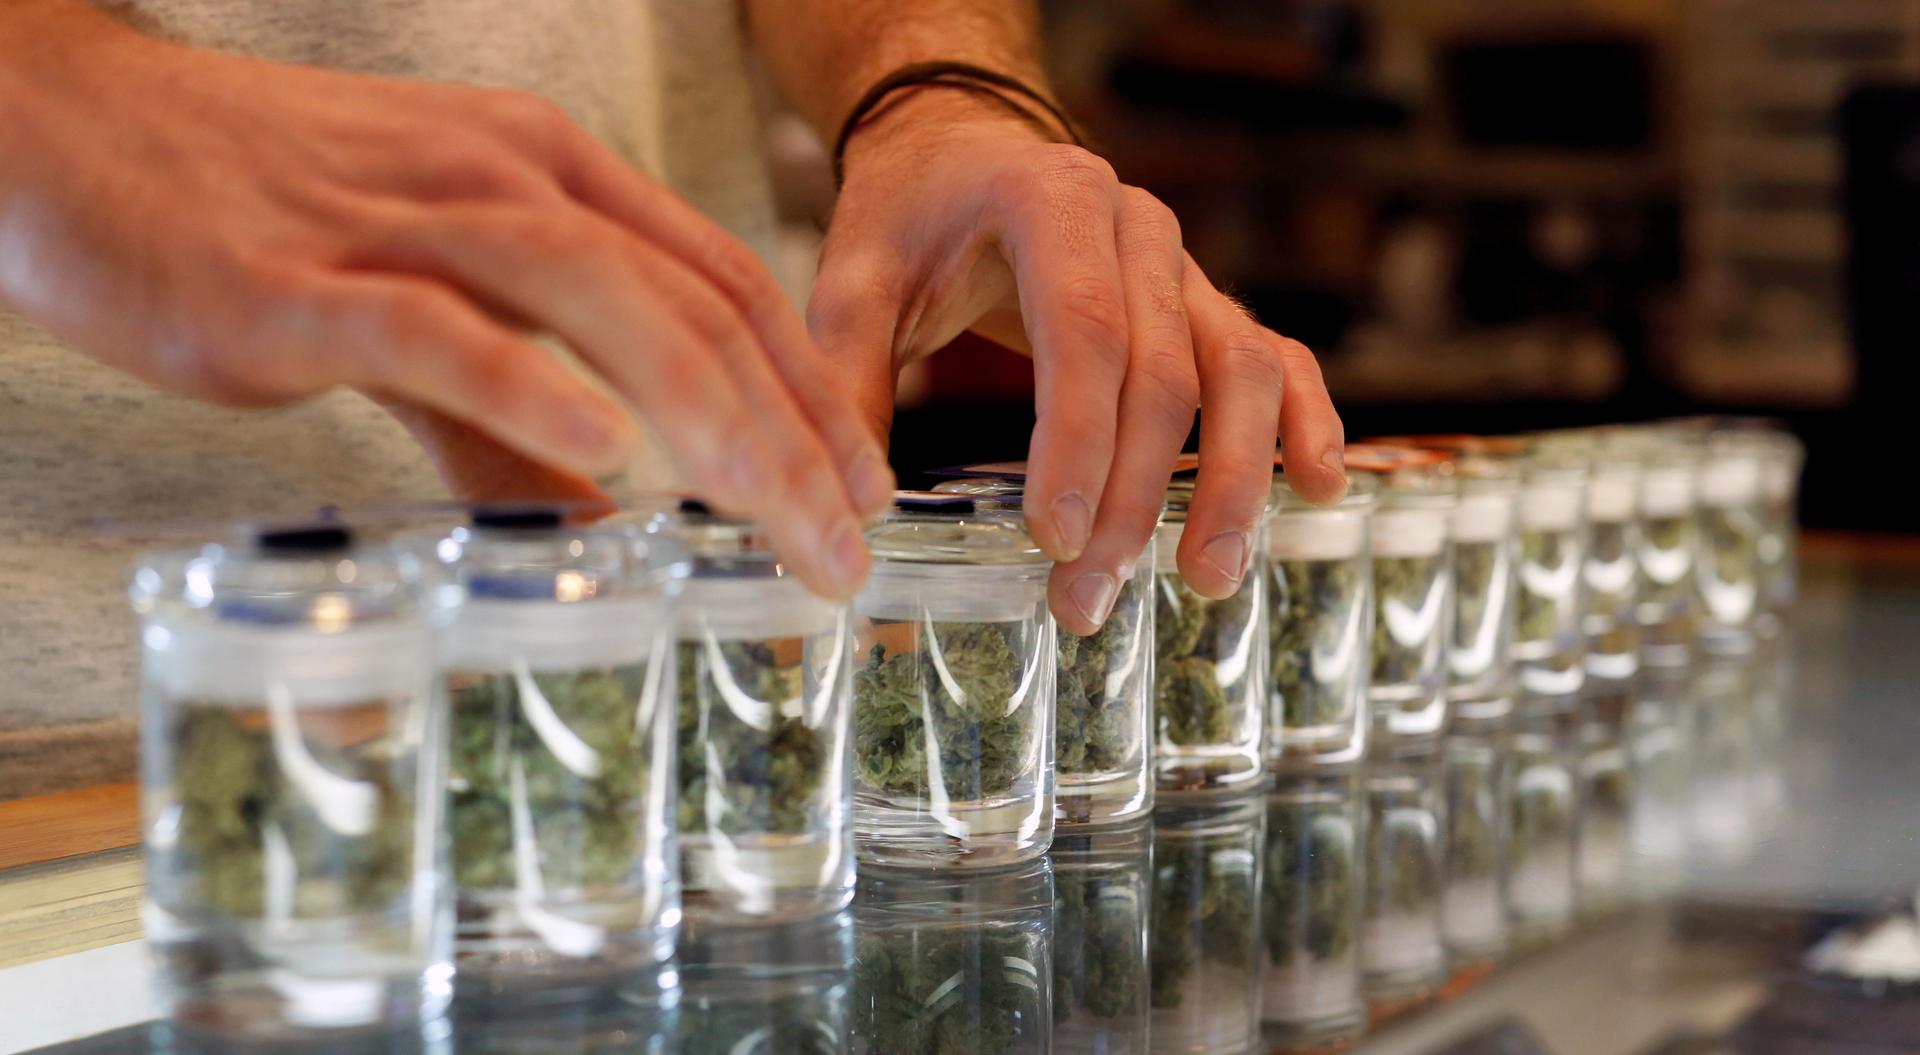 A variety of medicinal marijuana buds in jars are pictured at Los Angeles Patients & Caregivers Group dispensary in West Hollywood, California U.S., October 18, 2016.